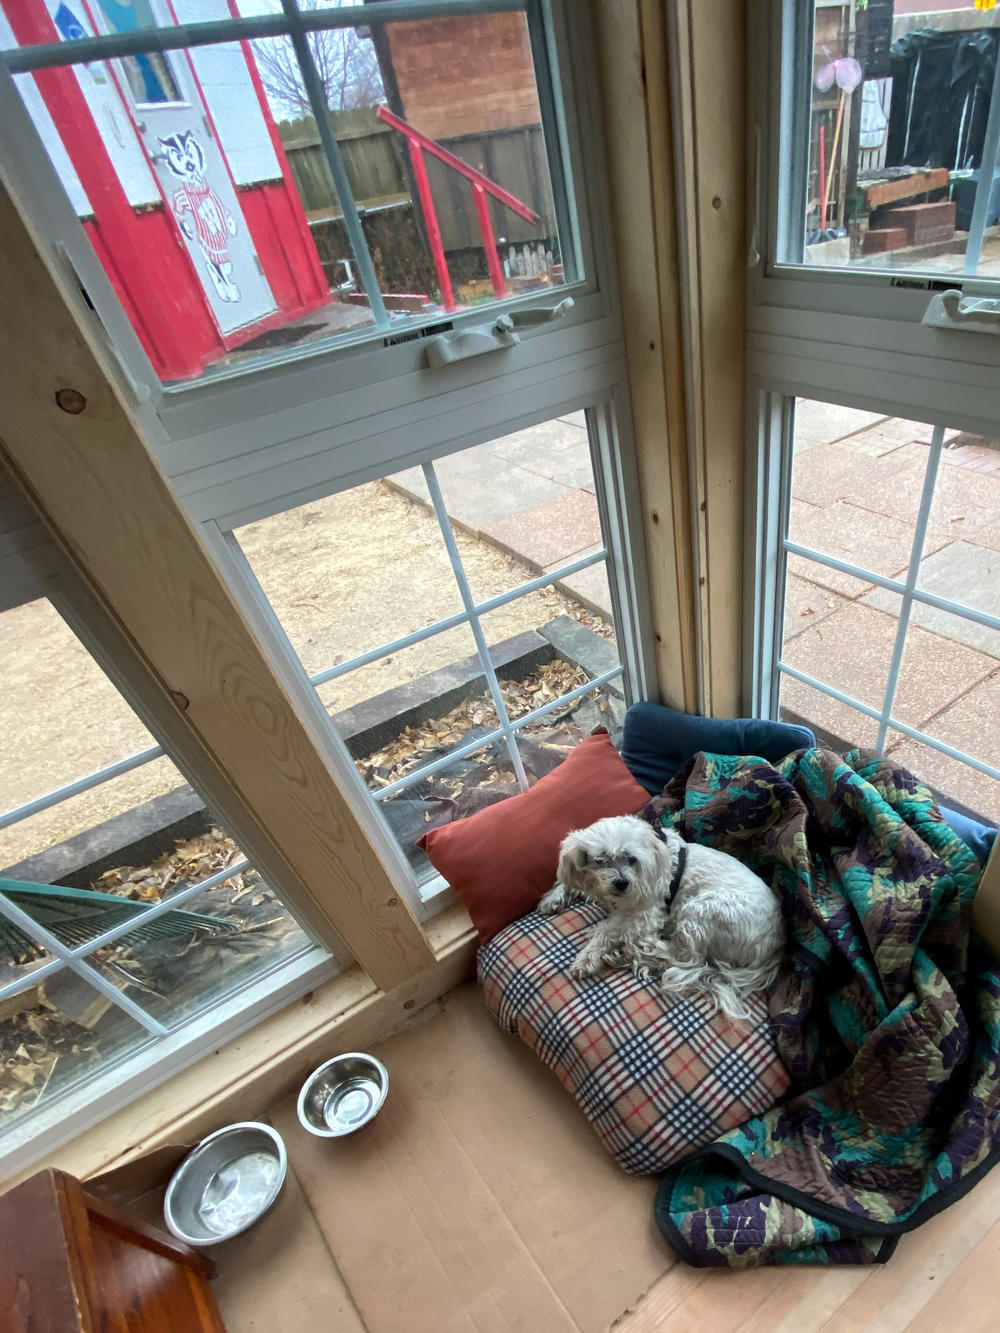 Buster the dog sits by a window in the community building of an Occupy Madison tiny home village in Madison, Wisconsin, in December, 2021. Unlike many homeless shelters, this community allows pets.